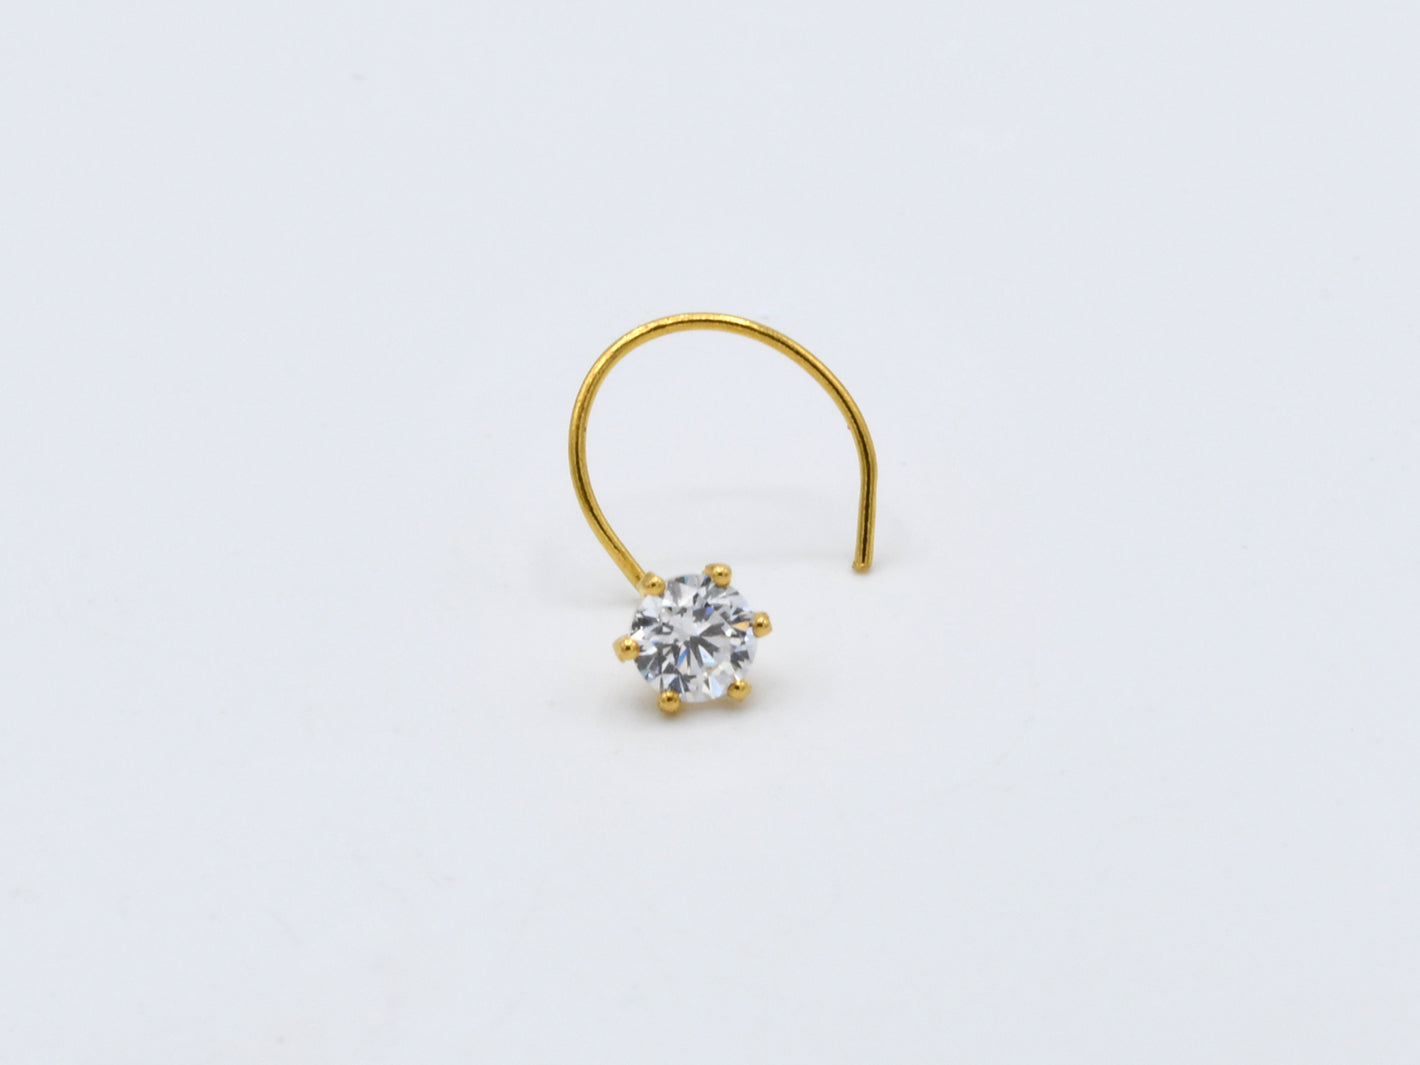 22ct Gold CZ Nose Pin - 3.5 mm - Roop Darshan